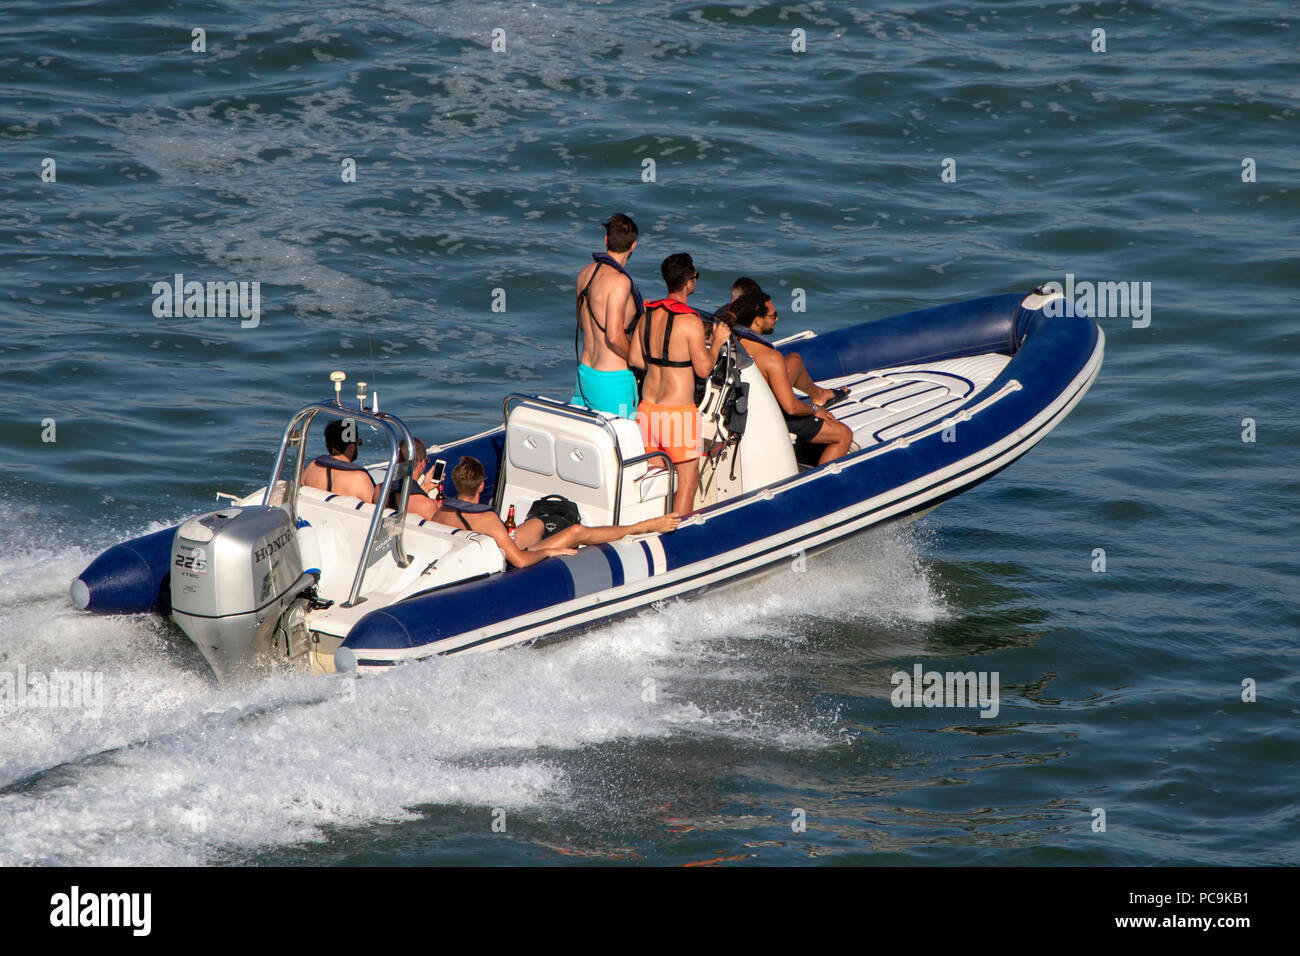 Group of young men riding an inflatable rib dinghy boat on the Solent in Southampton Stock Photo